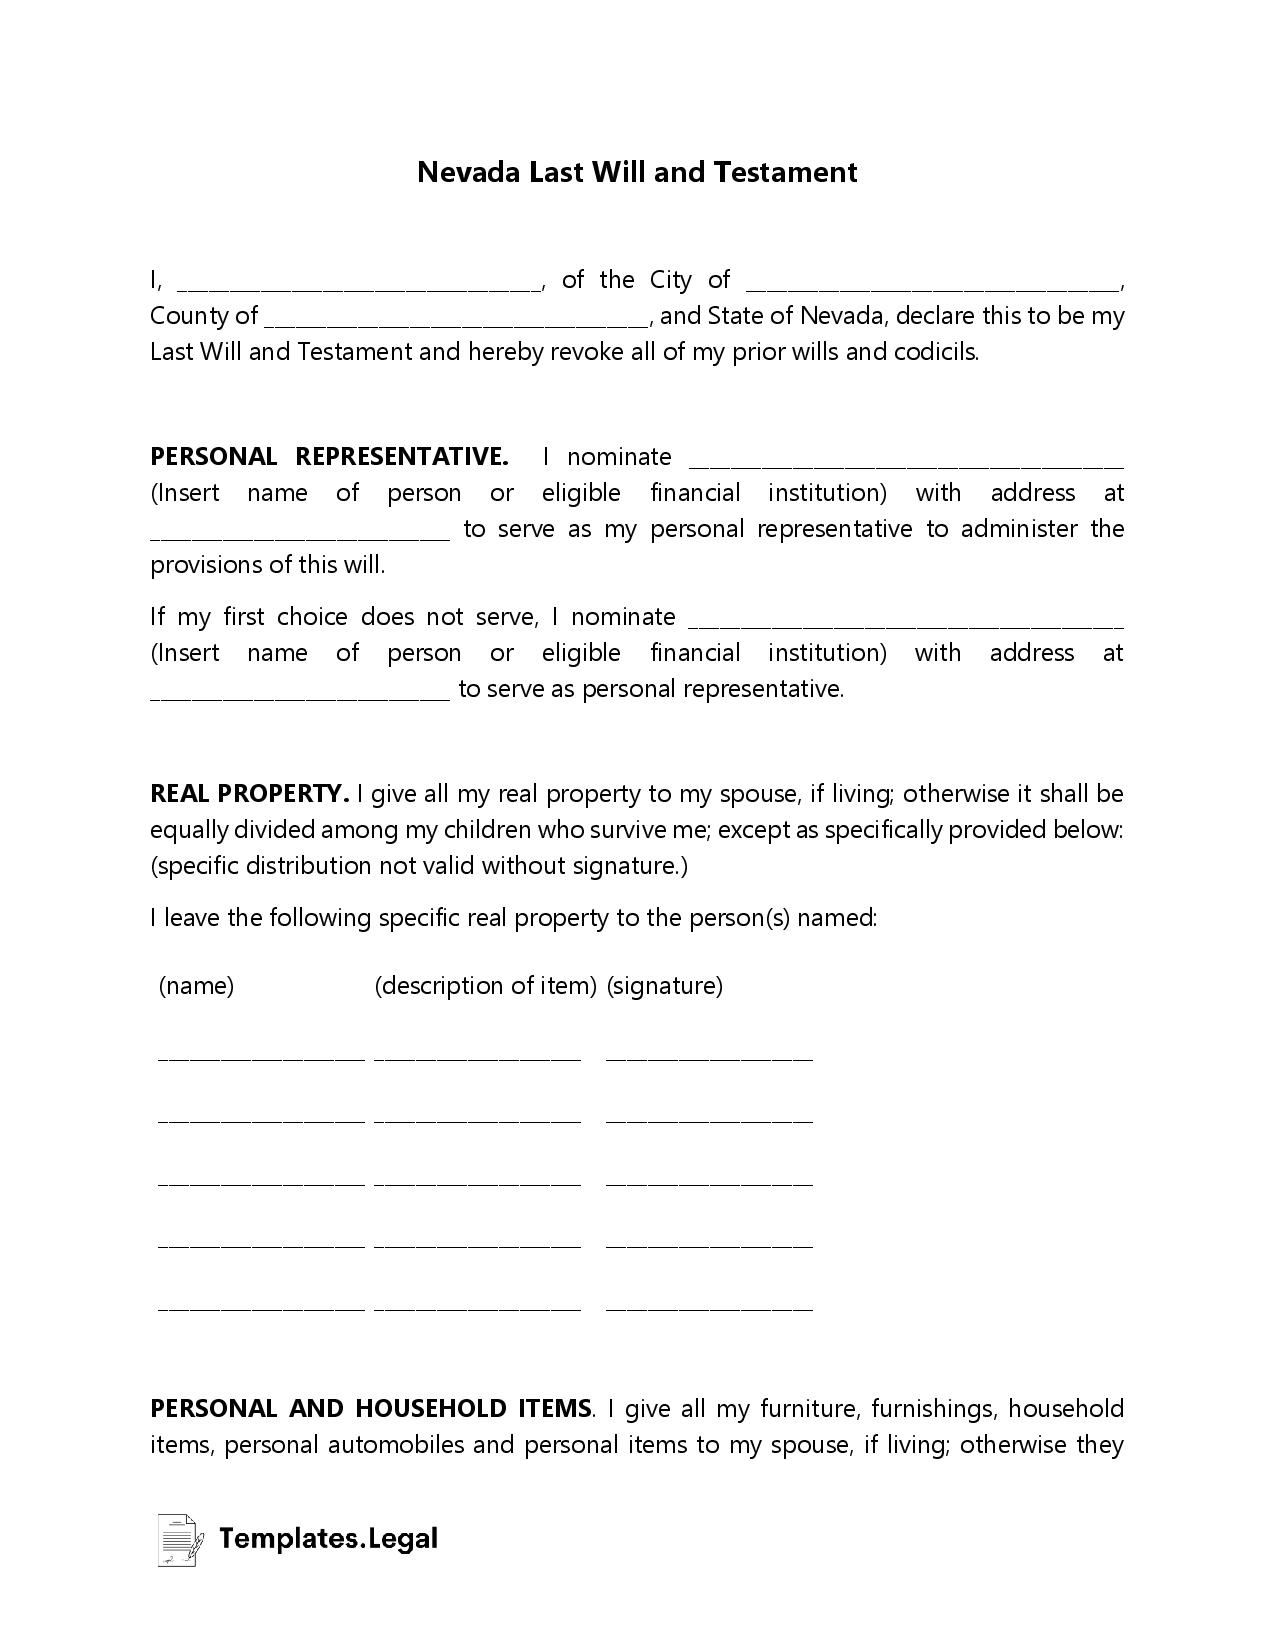 Nevada Last Will and Testament - Templates.Legal